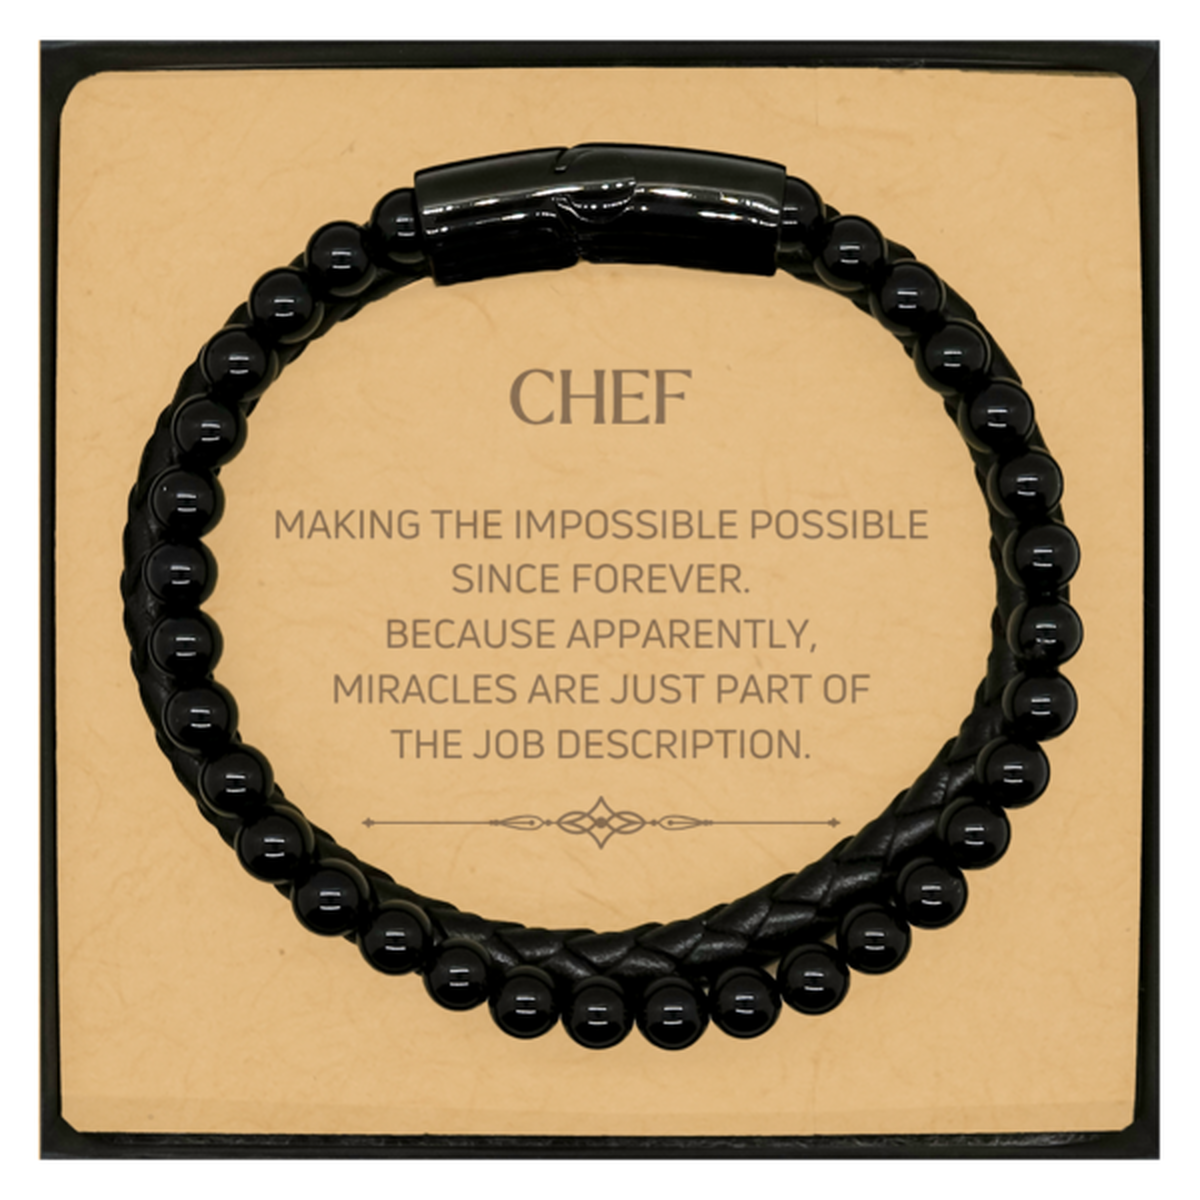 Funny Chef Gifts, Miracles are just part of the job description, Inspirational Birthday Christmas Stone Leather Bracelets For Chef, Men, Women, Coworkers, Friends, Boss